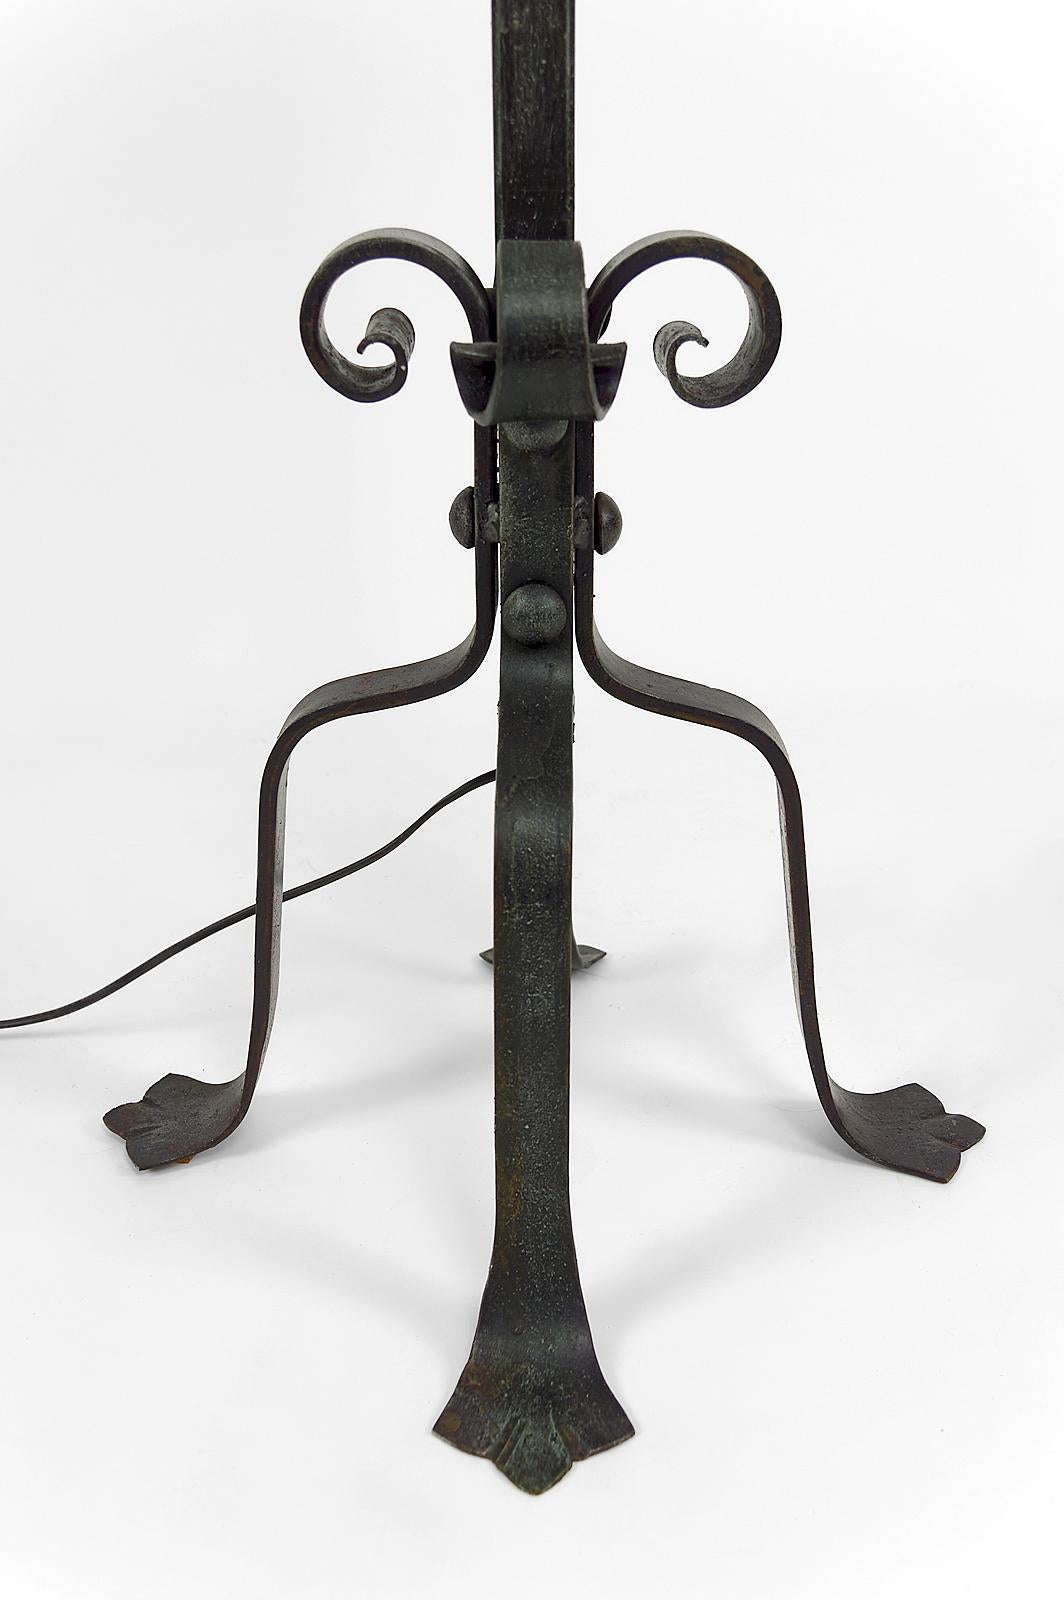 Rooster Floor Lamp in Wrought Iron by Jean Touret for Ateliers Marolles, 1950's For Sale 4